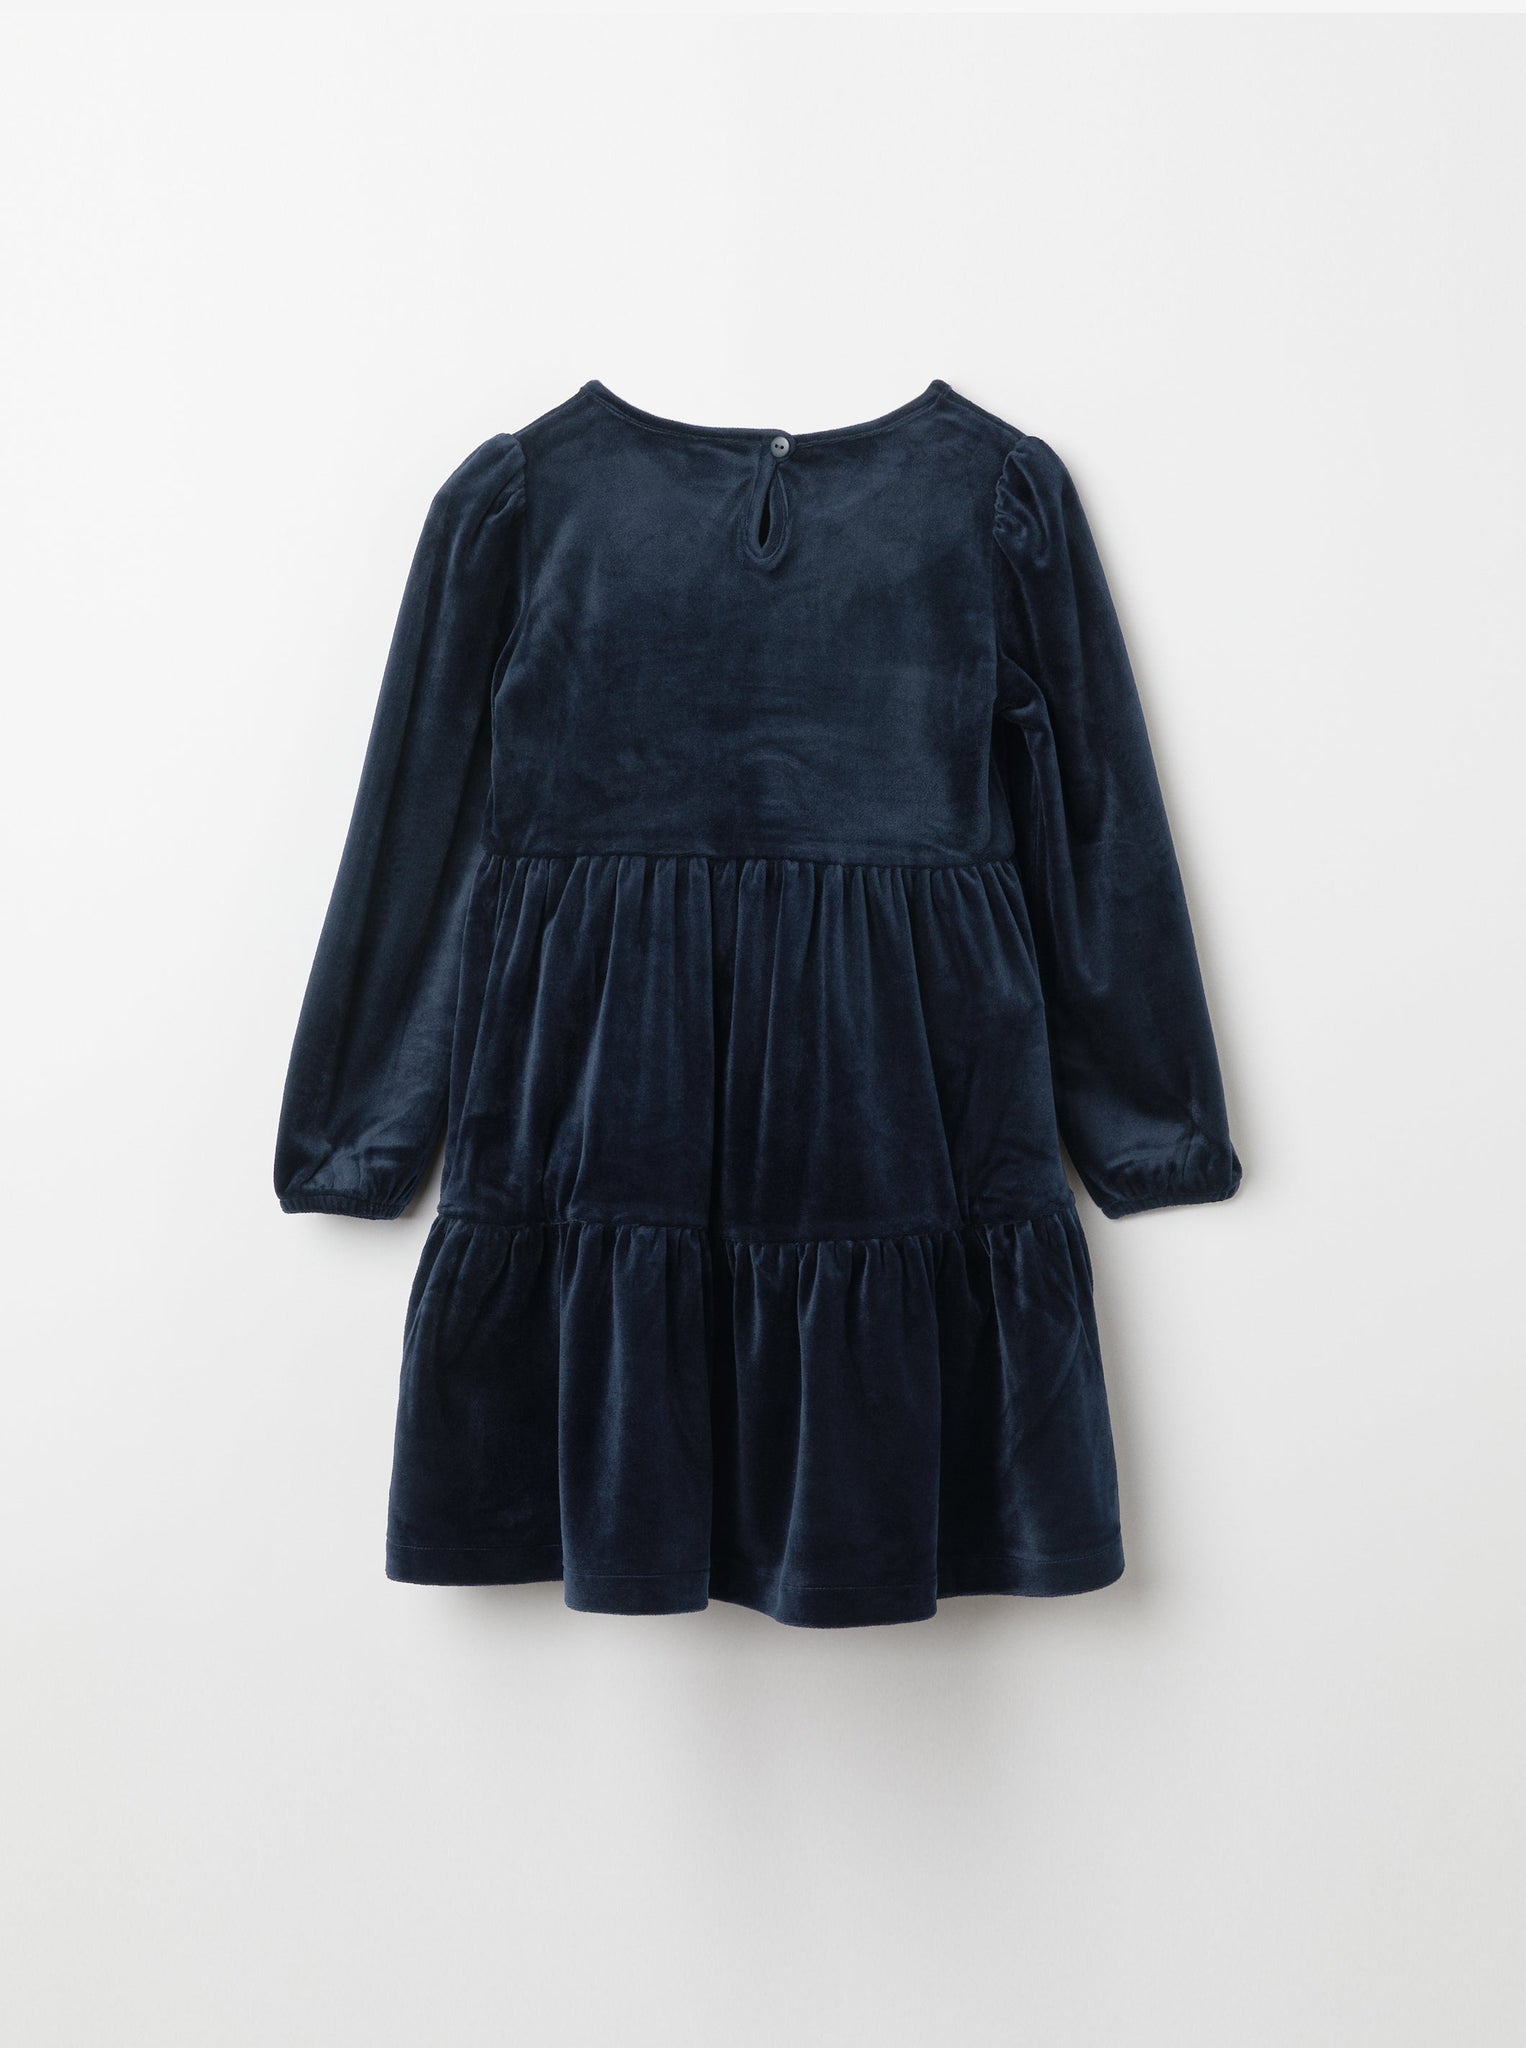 Navy Kids Velour Dress from the Polarn O. Pyret kidswear collection. The best ethical kids clothes